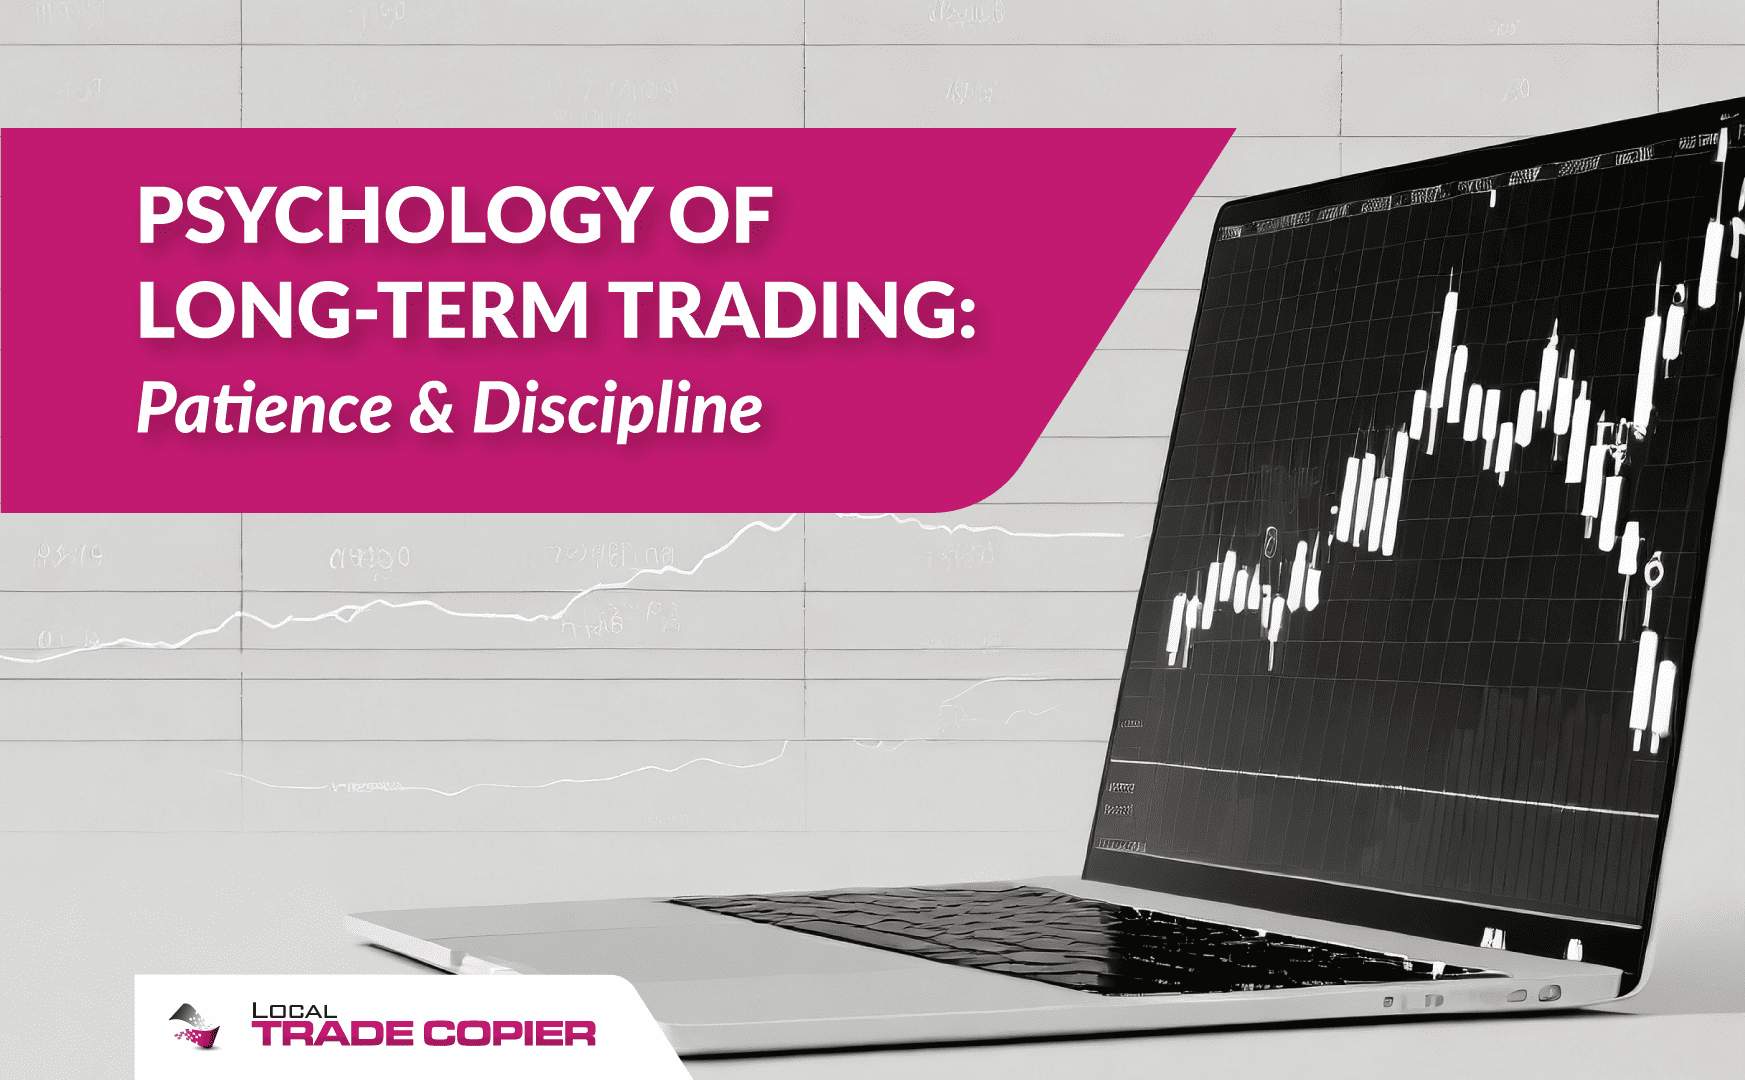 Psychology of Long-Term Trading: Patience & Discipline